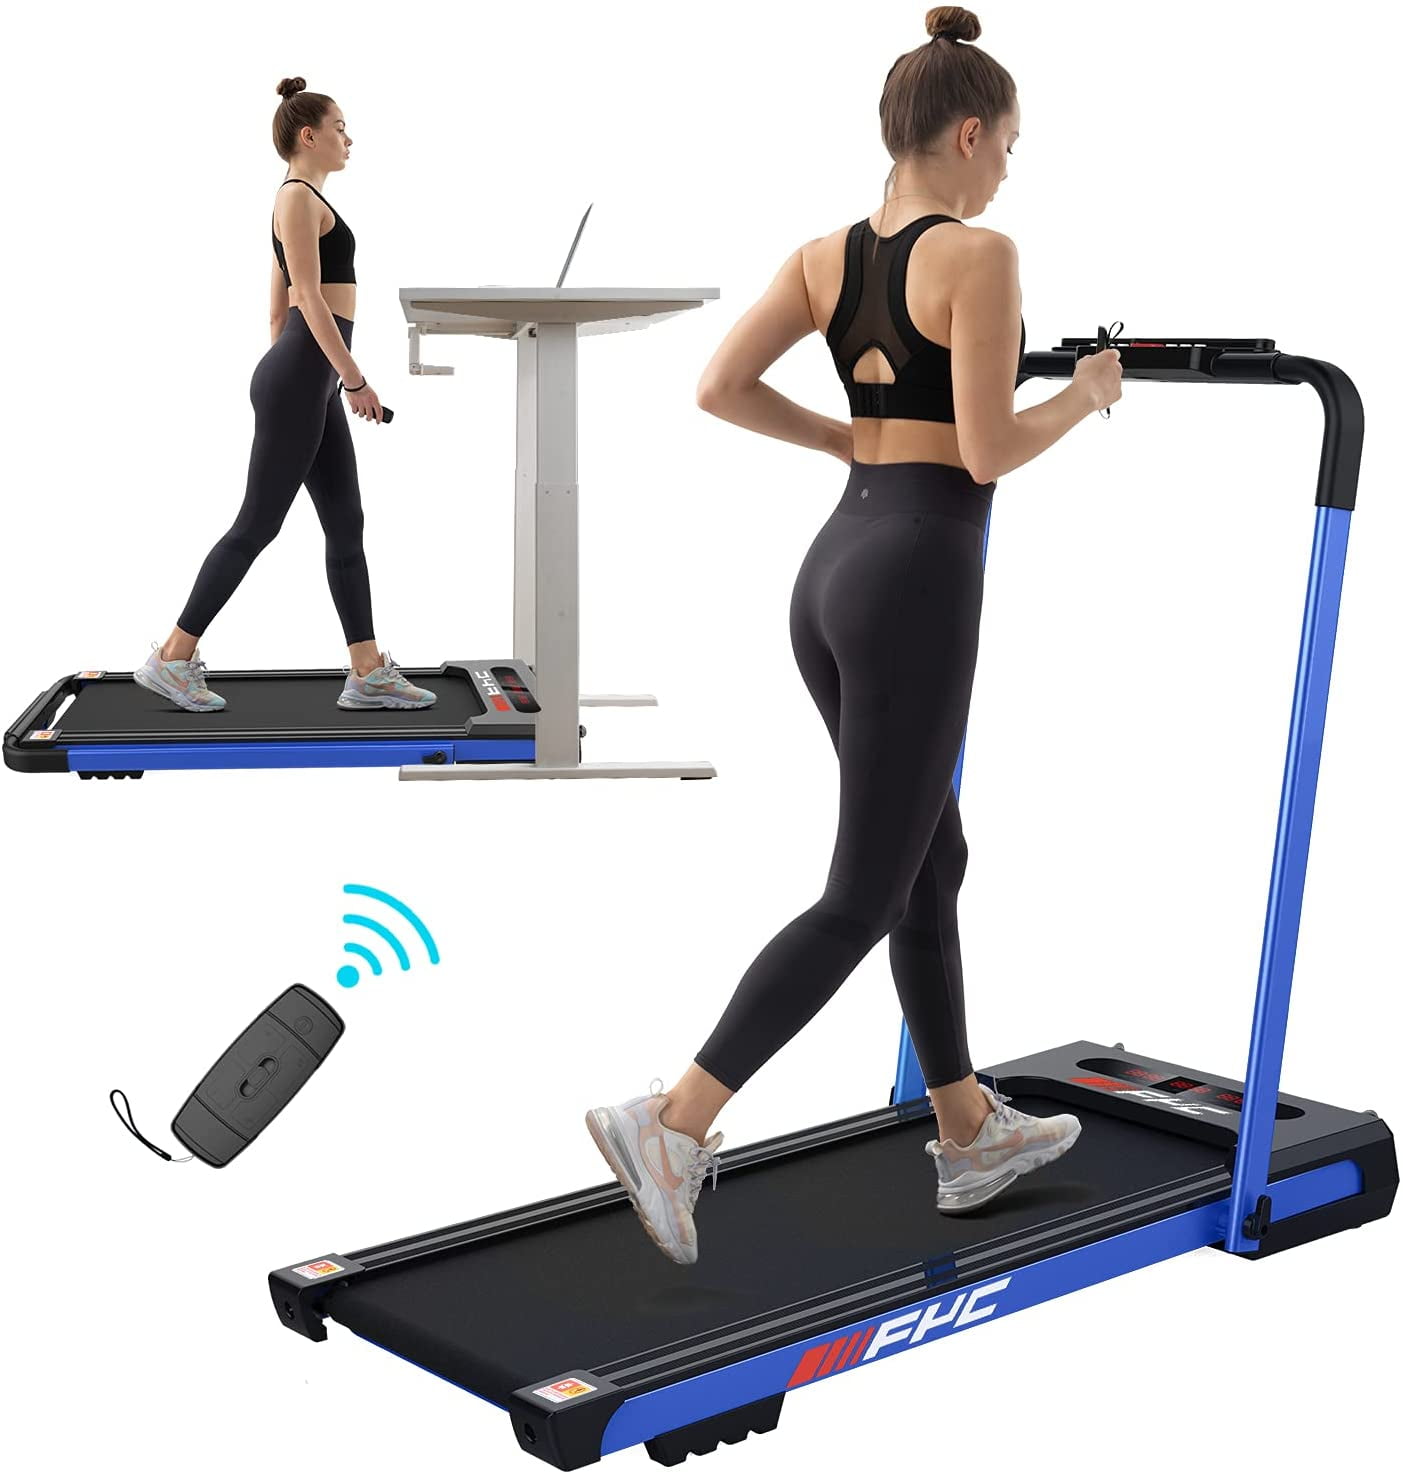 Details about   Electric Walking Treadmill Jogging Pad Exercise Machine Remote Control Home US 